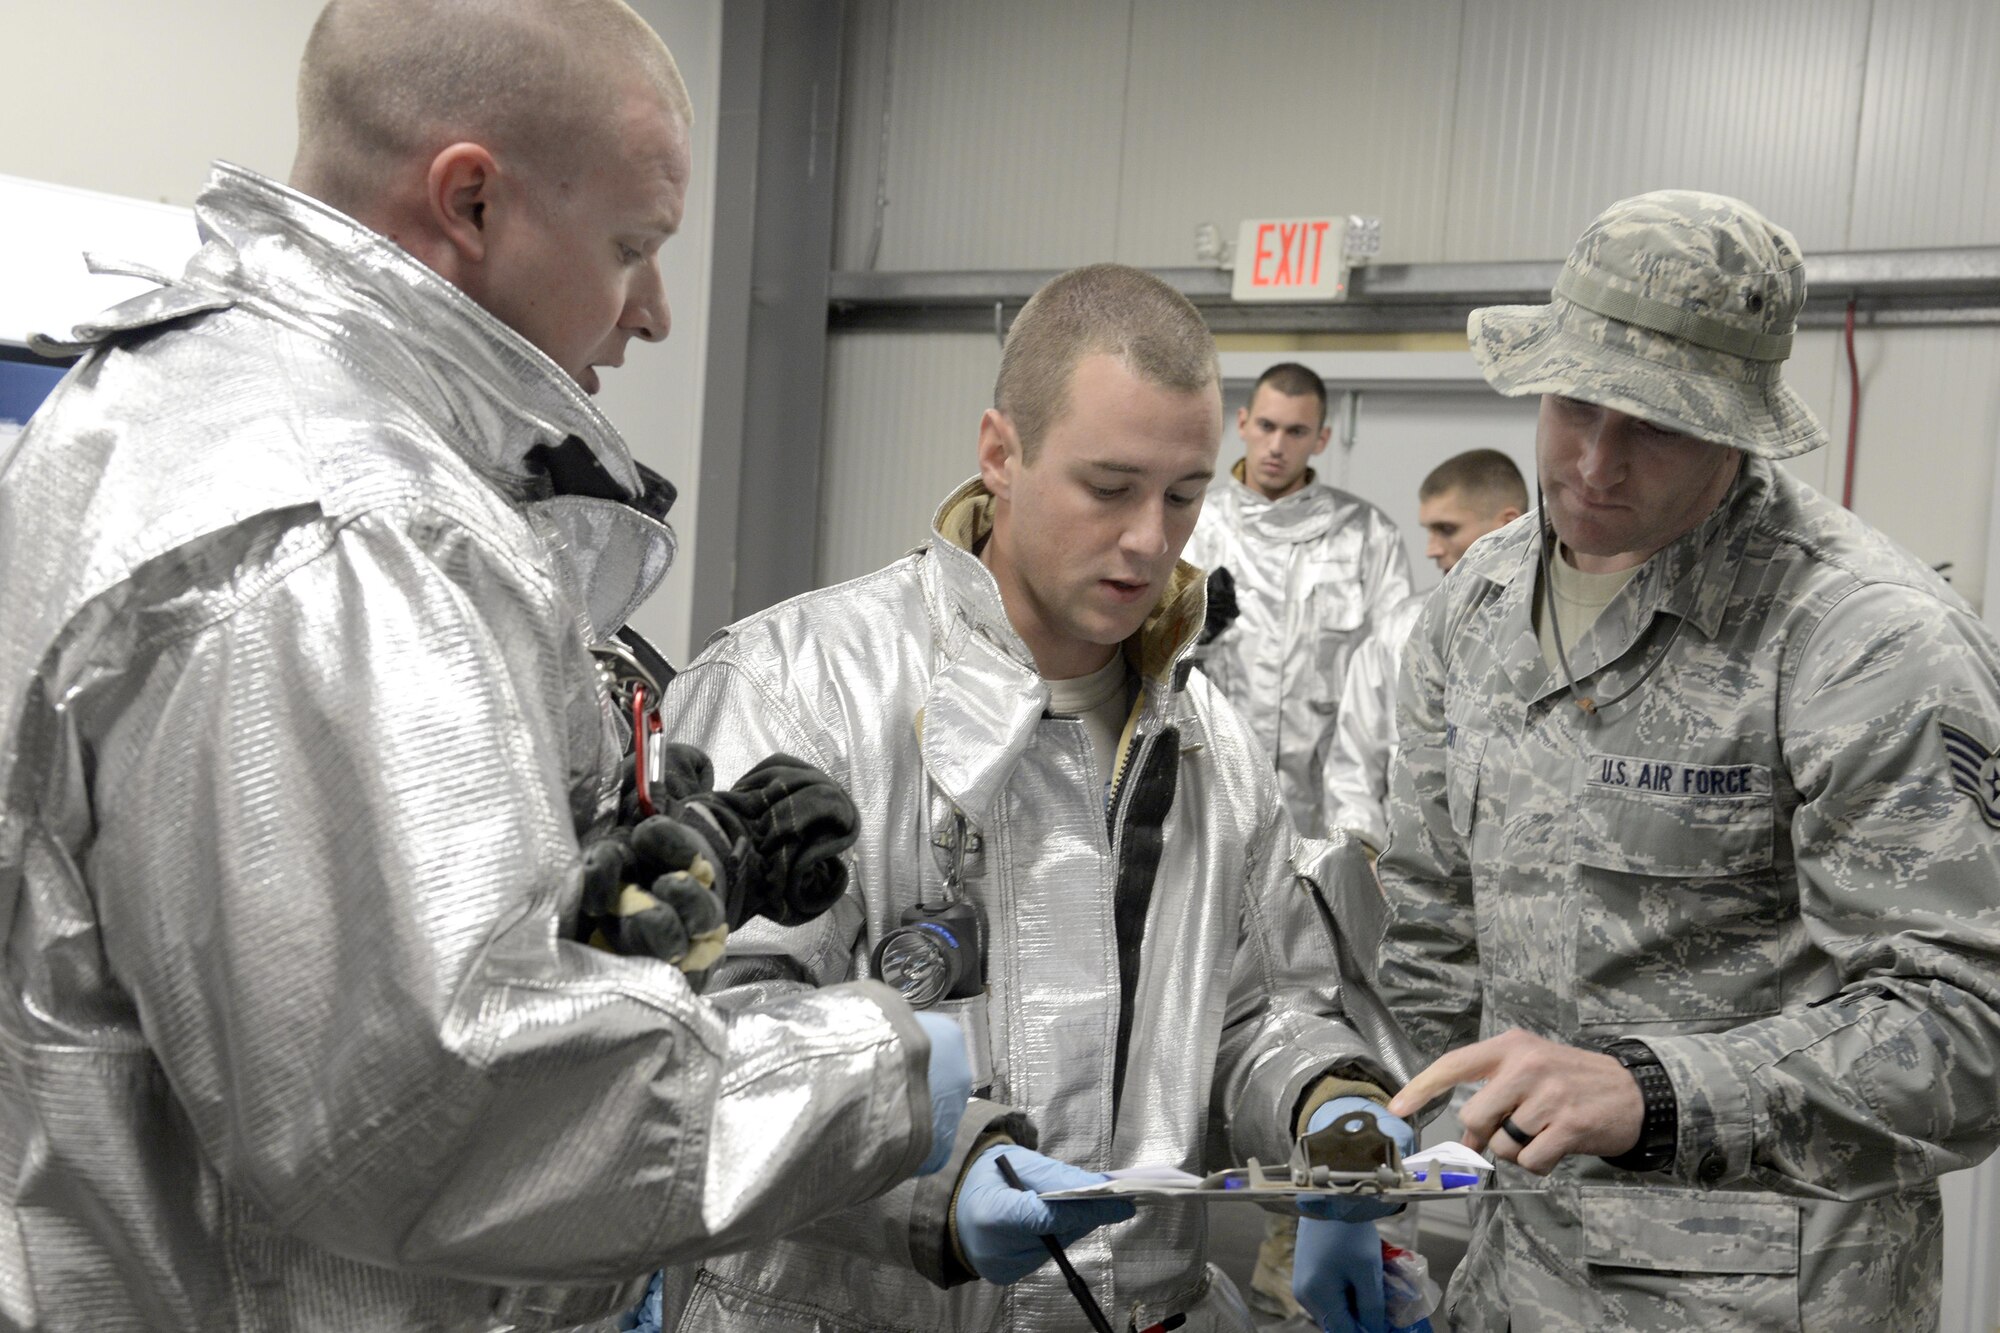 Staff Sgt. Kyle, Expeditionary Civil Engineer Squadron crew chief, and Senior Airman Austin, fire truck driver and operator, review a medical questionnaire with Staff Sgt. Joshua, medical technician, during a training exercise at an undisclosed location in Southwest Asia Jan. 15, 2015. Kyle is currently deployed from Beale Air Force Base, Calif., and is a native of Vacaville, Calif. Austin is currently deployed from Travis Air Force Base, Calif., and is a native of Twinfalls, Idaho. Joshua is currently deployed from Joint Base Langley-Eustis, Va., and is a native of Celina, Ohio. (U.S. Air Force photo/Tech. Sgt. Marie Brown)